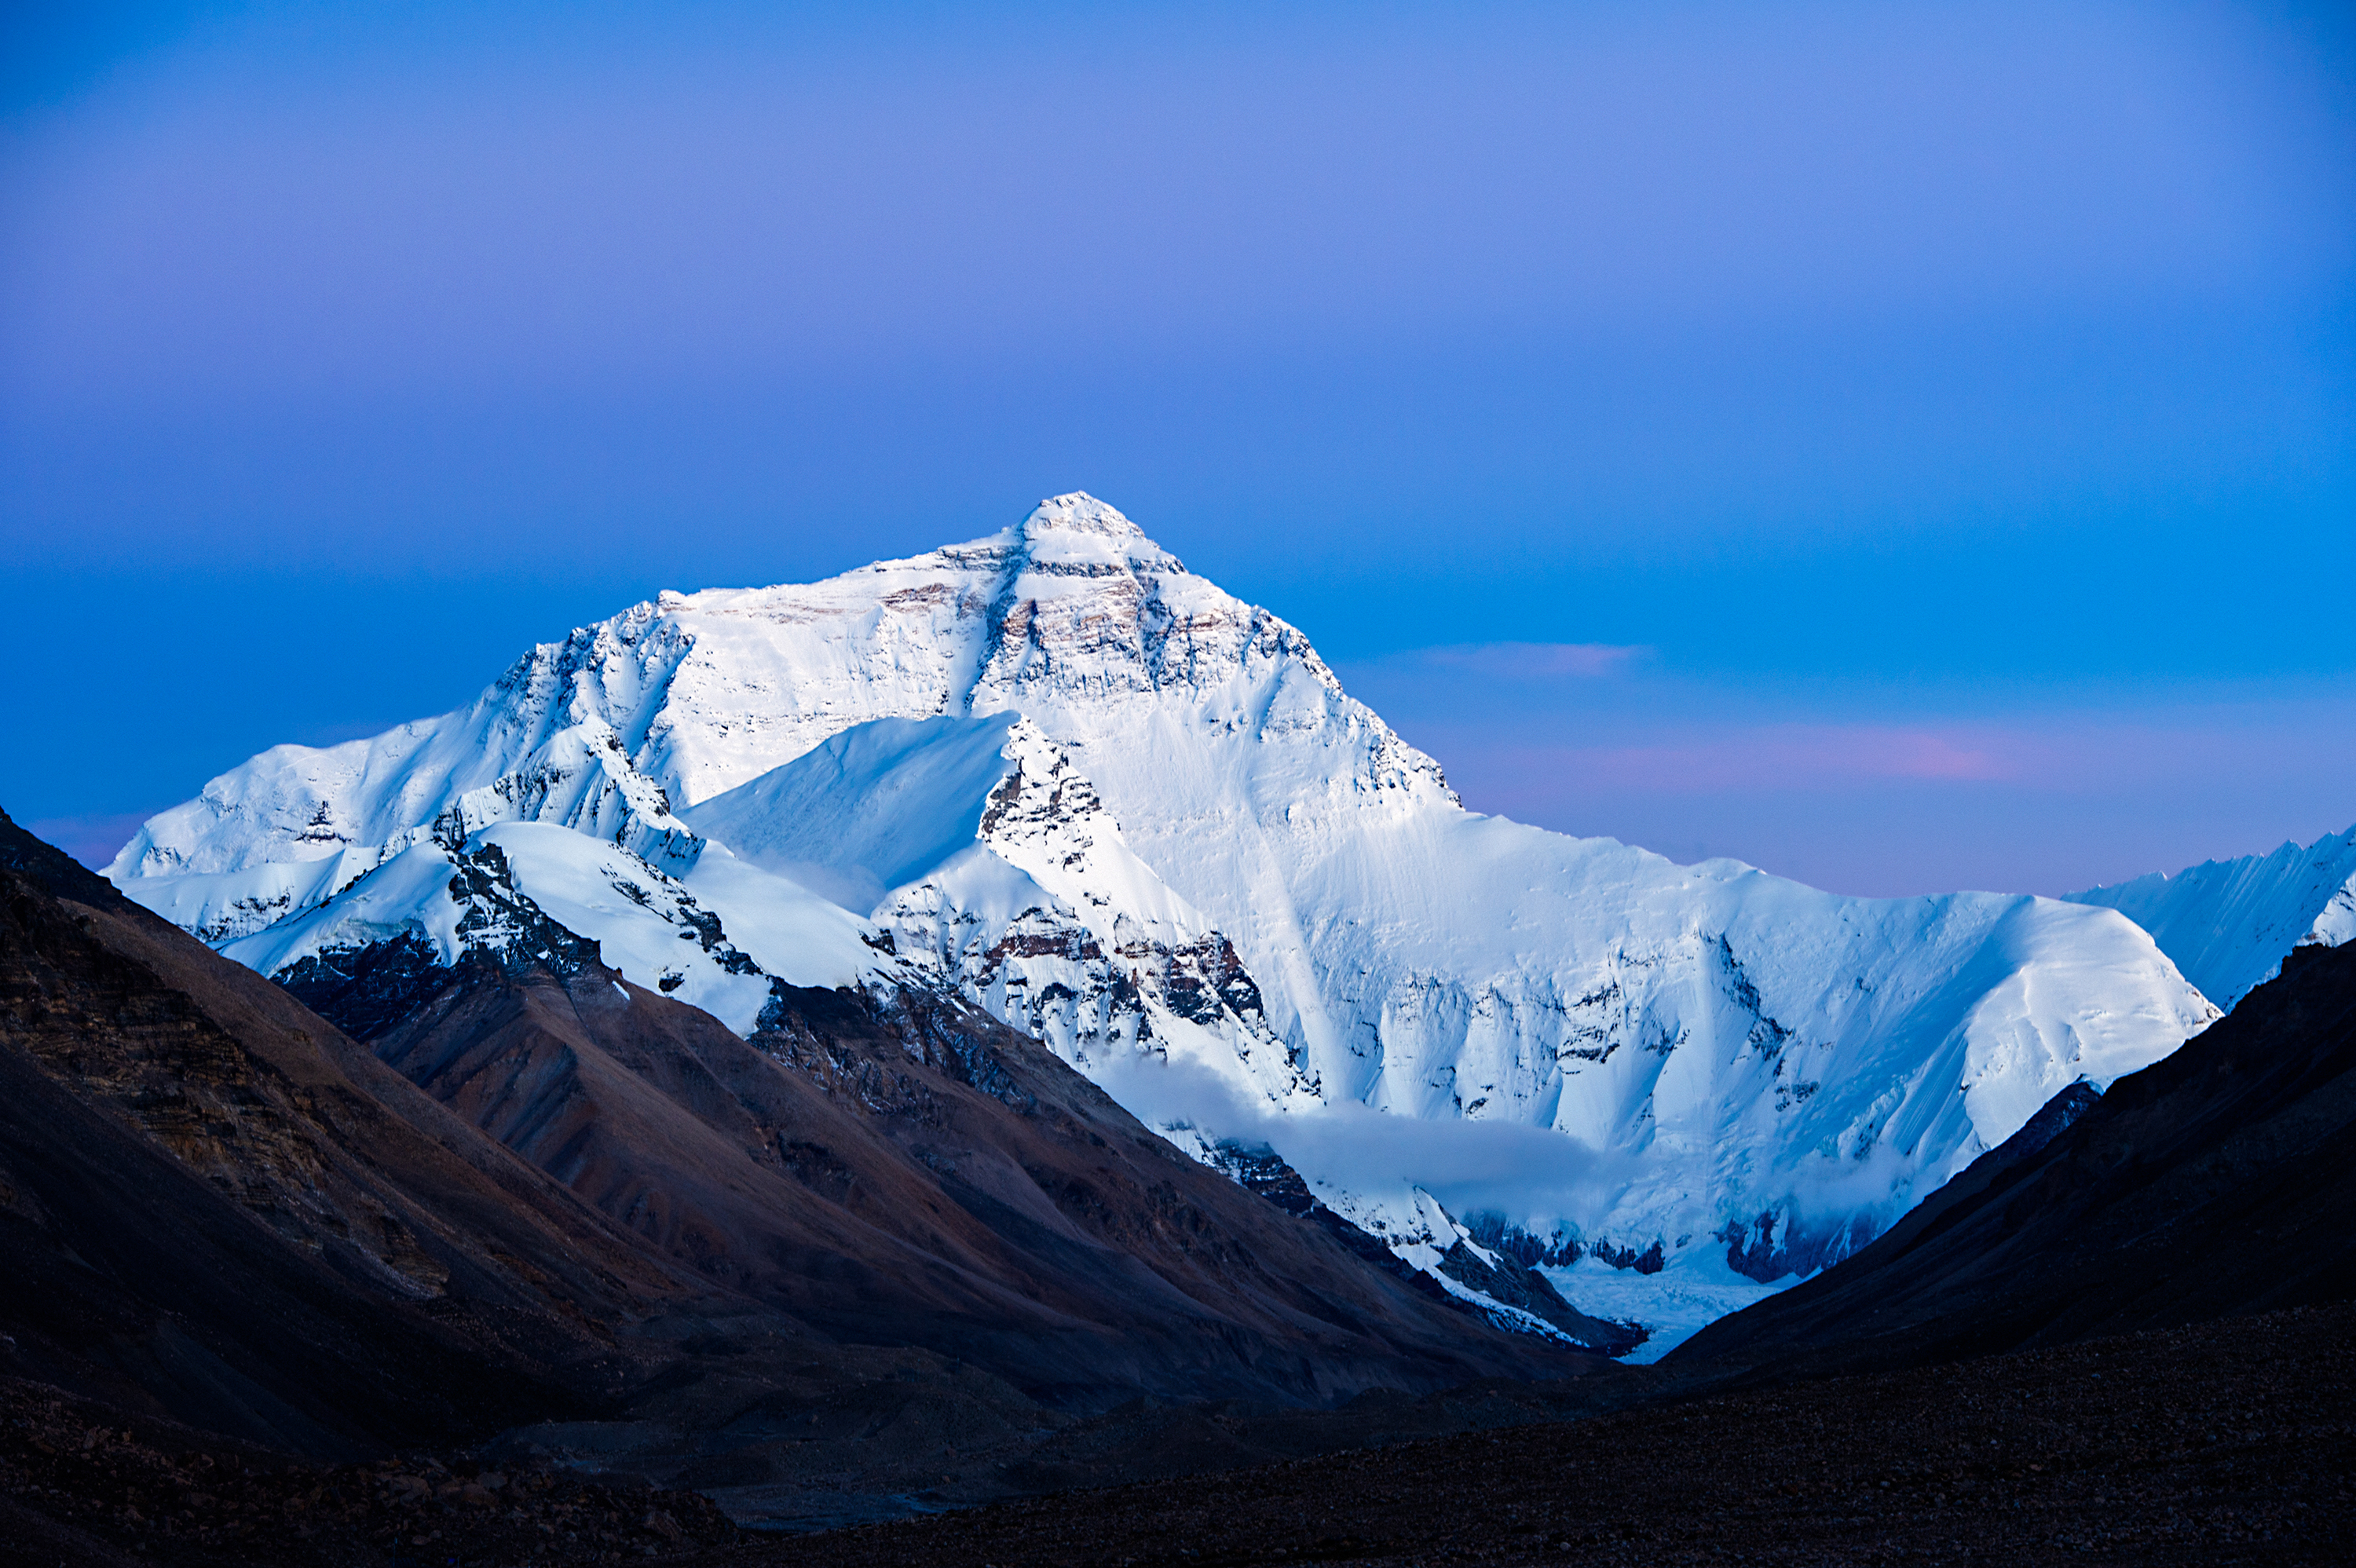 Snowpack on Mount Everest is Over 9x Deeper Than Originally